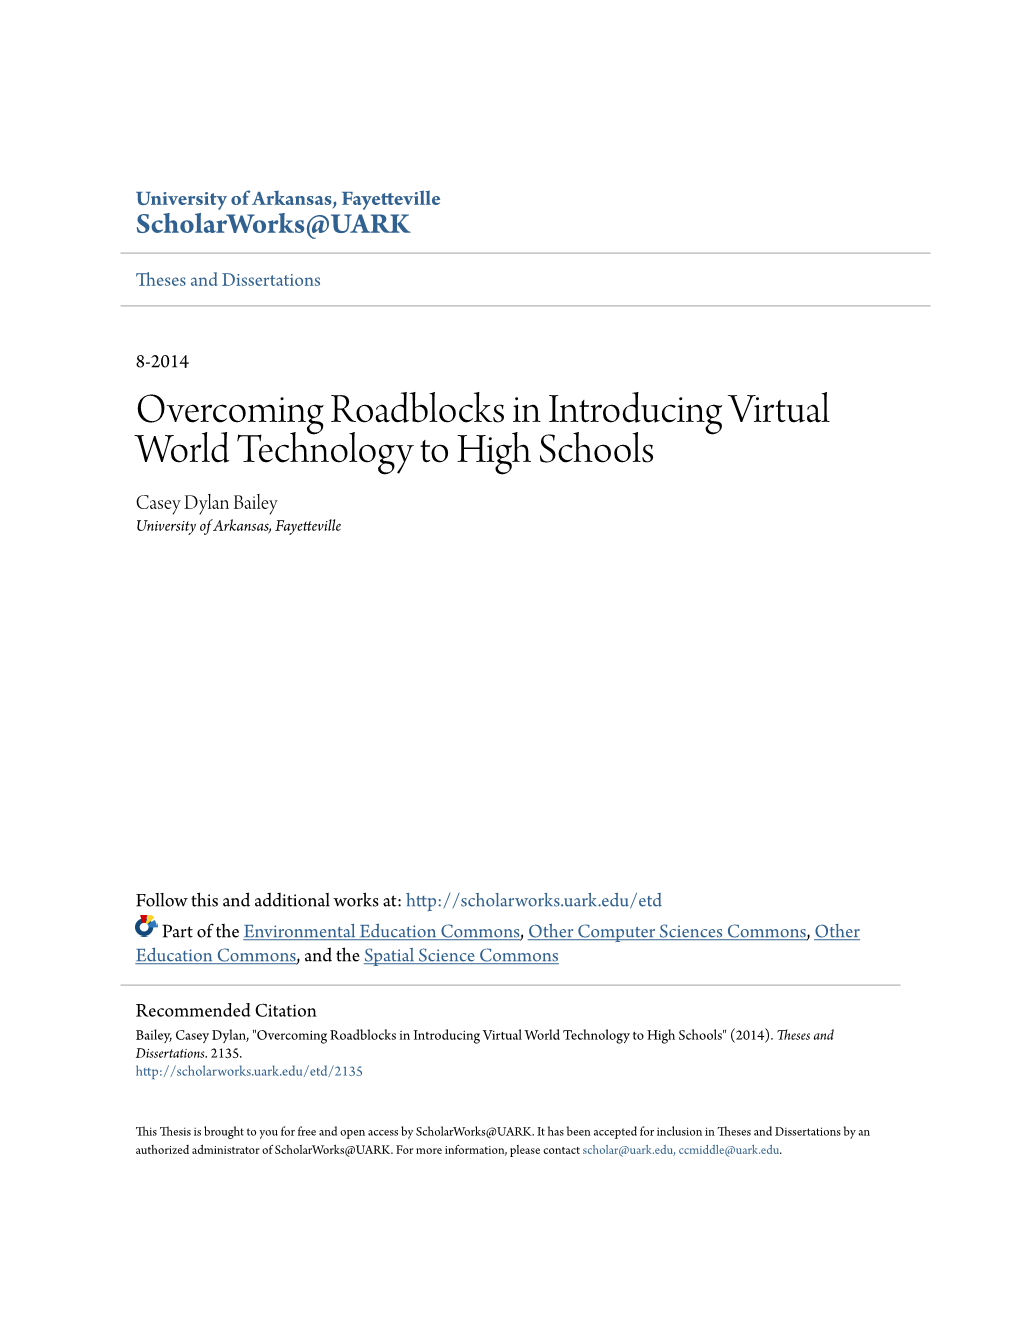 Overcoming Roadblocks in Introducing Virtual World Technology to High Schools Casey Dylan Bailey University of Arkansas, Fayetteville